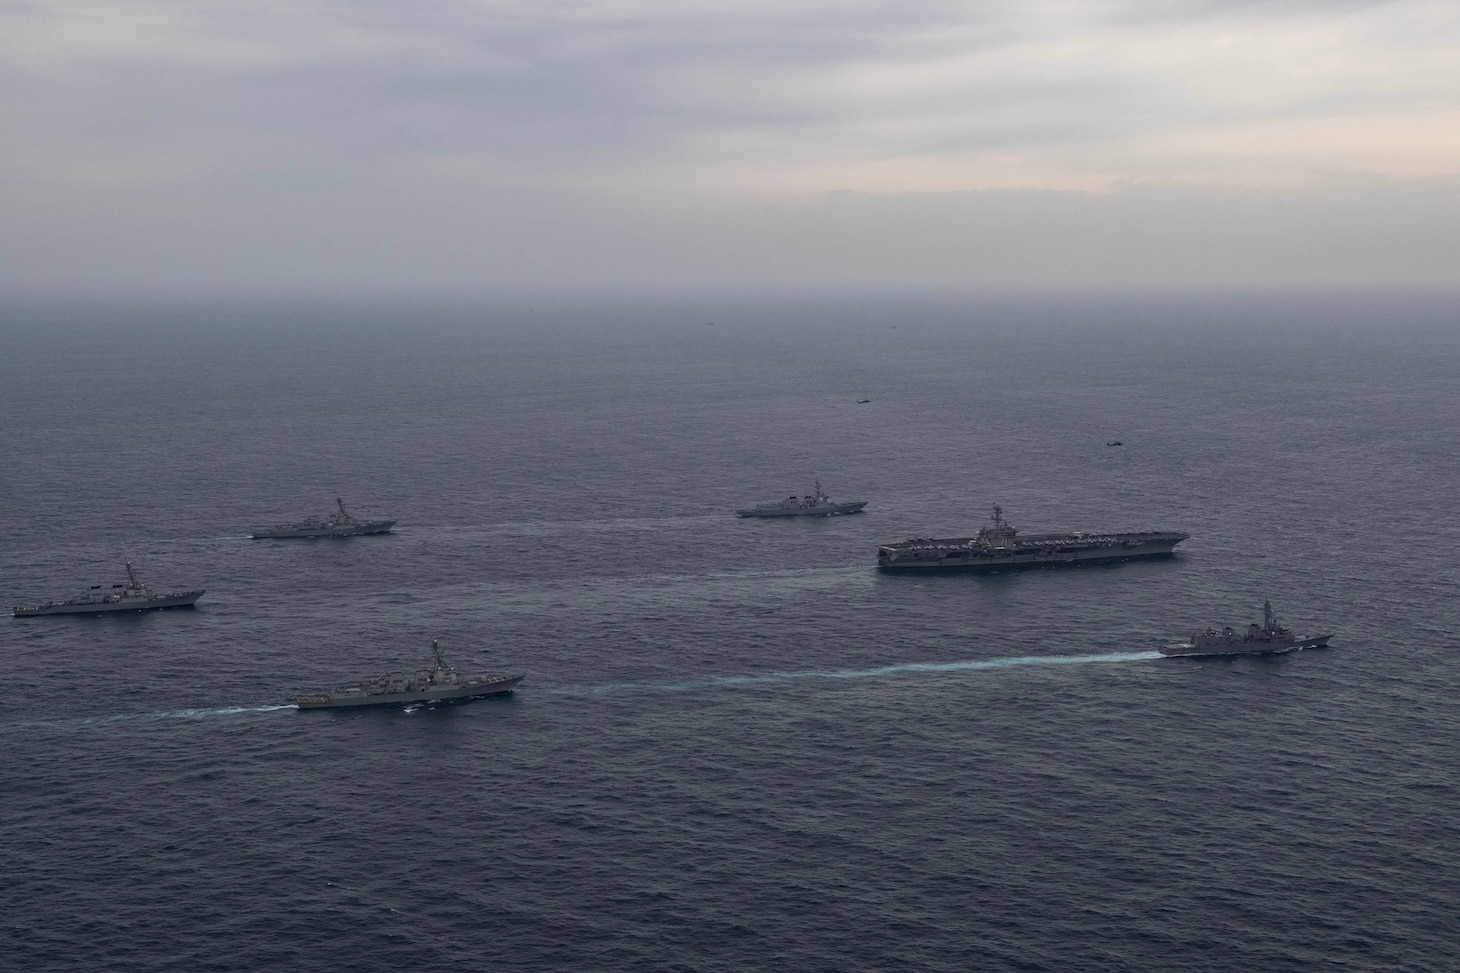 Ships assigned to the Theodore Roosevelt Carrier Strike Group, Japan Maritime Self-Defense Force and Republic of Korea Navy sail in formation during a trilateral exercise, April 11, 2024. This trilateral exercise allowed maritime forces from Japan, the Republic of Korea, and U.S. to train together to enhance coordination on maritime domain awareness and other shared security interests. The Theodore Roosevelt Carrier Strike Group is deployed to the U.S. 7th Fleet area of operations in support of a free and open Indo-Pacific. (U.S. Navy photo by Mass Communication Specialist 1st Class Tommy Gooley)